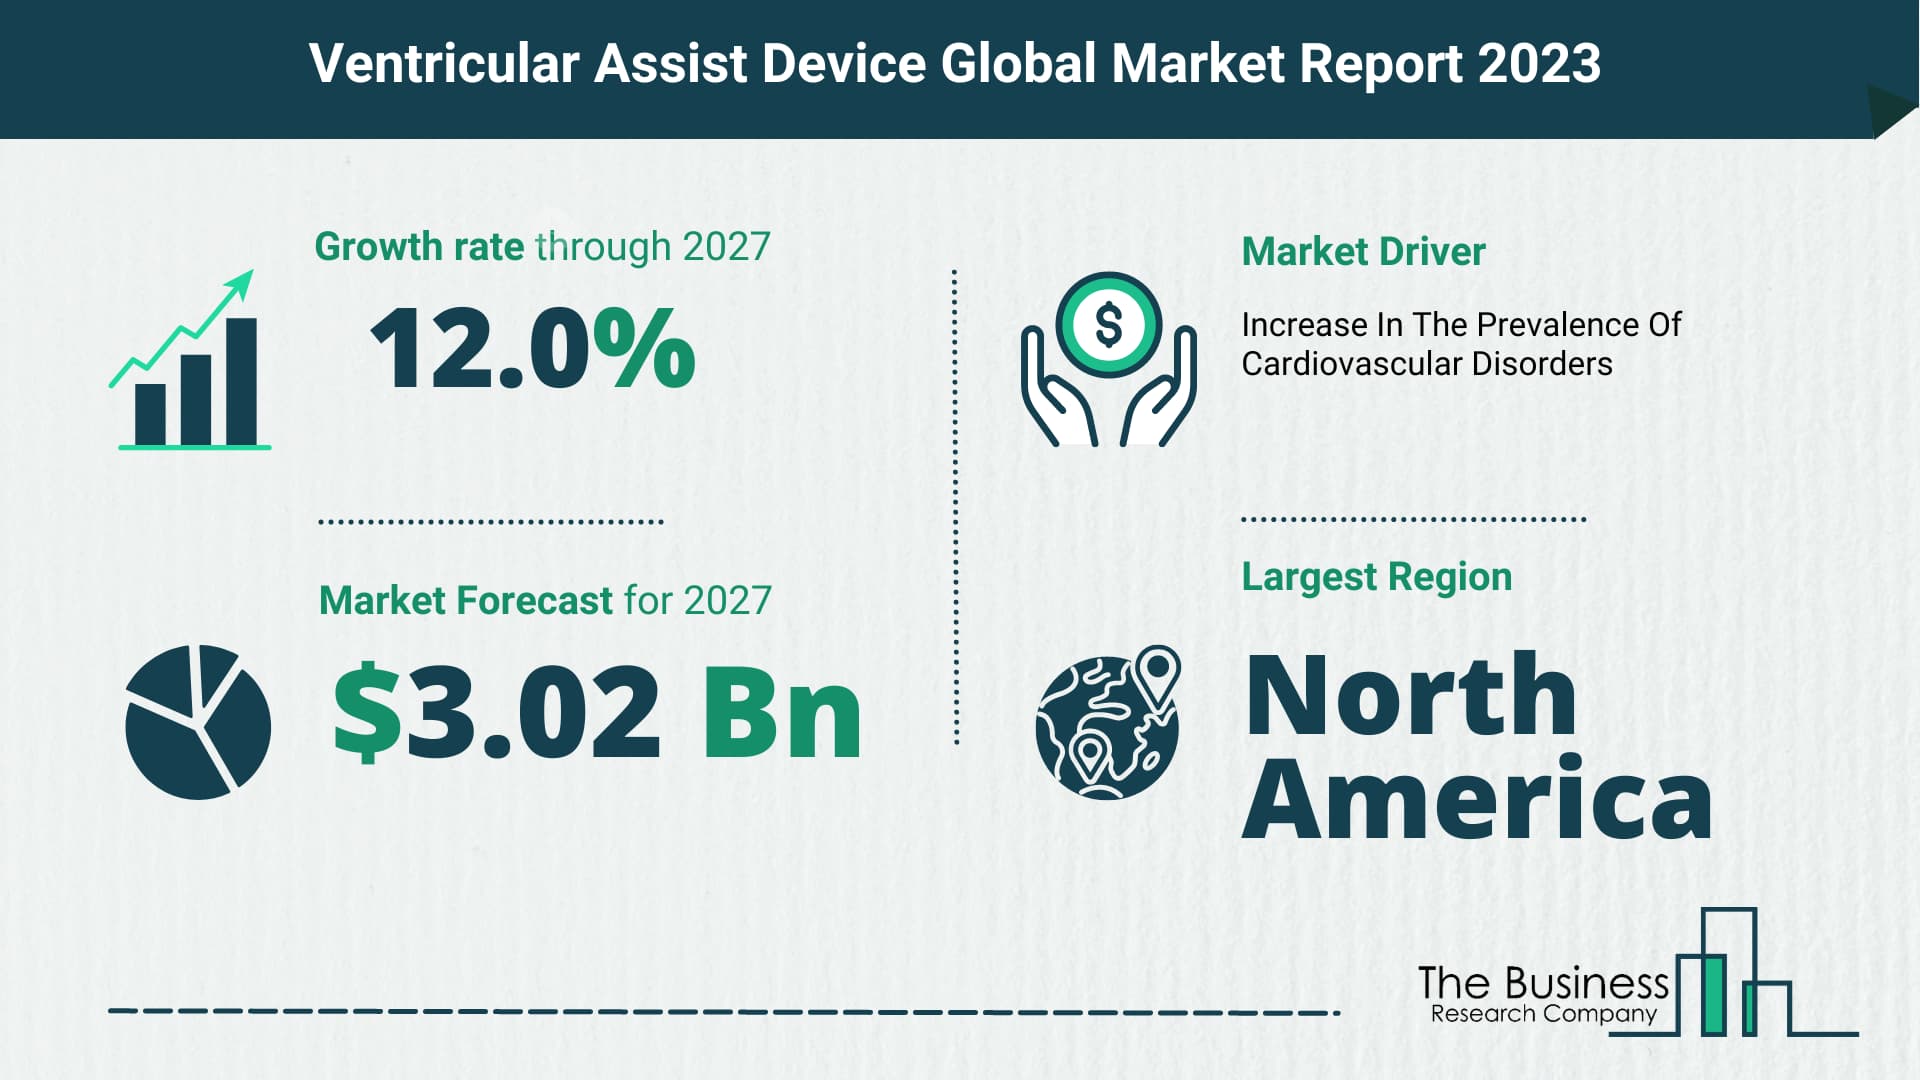 What Will The Ventricular Assist Device Market Look Like In 2023?